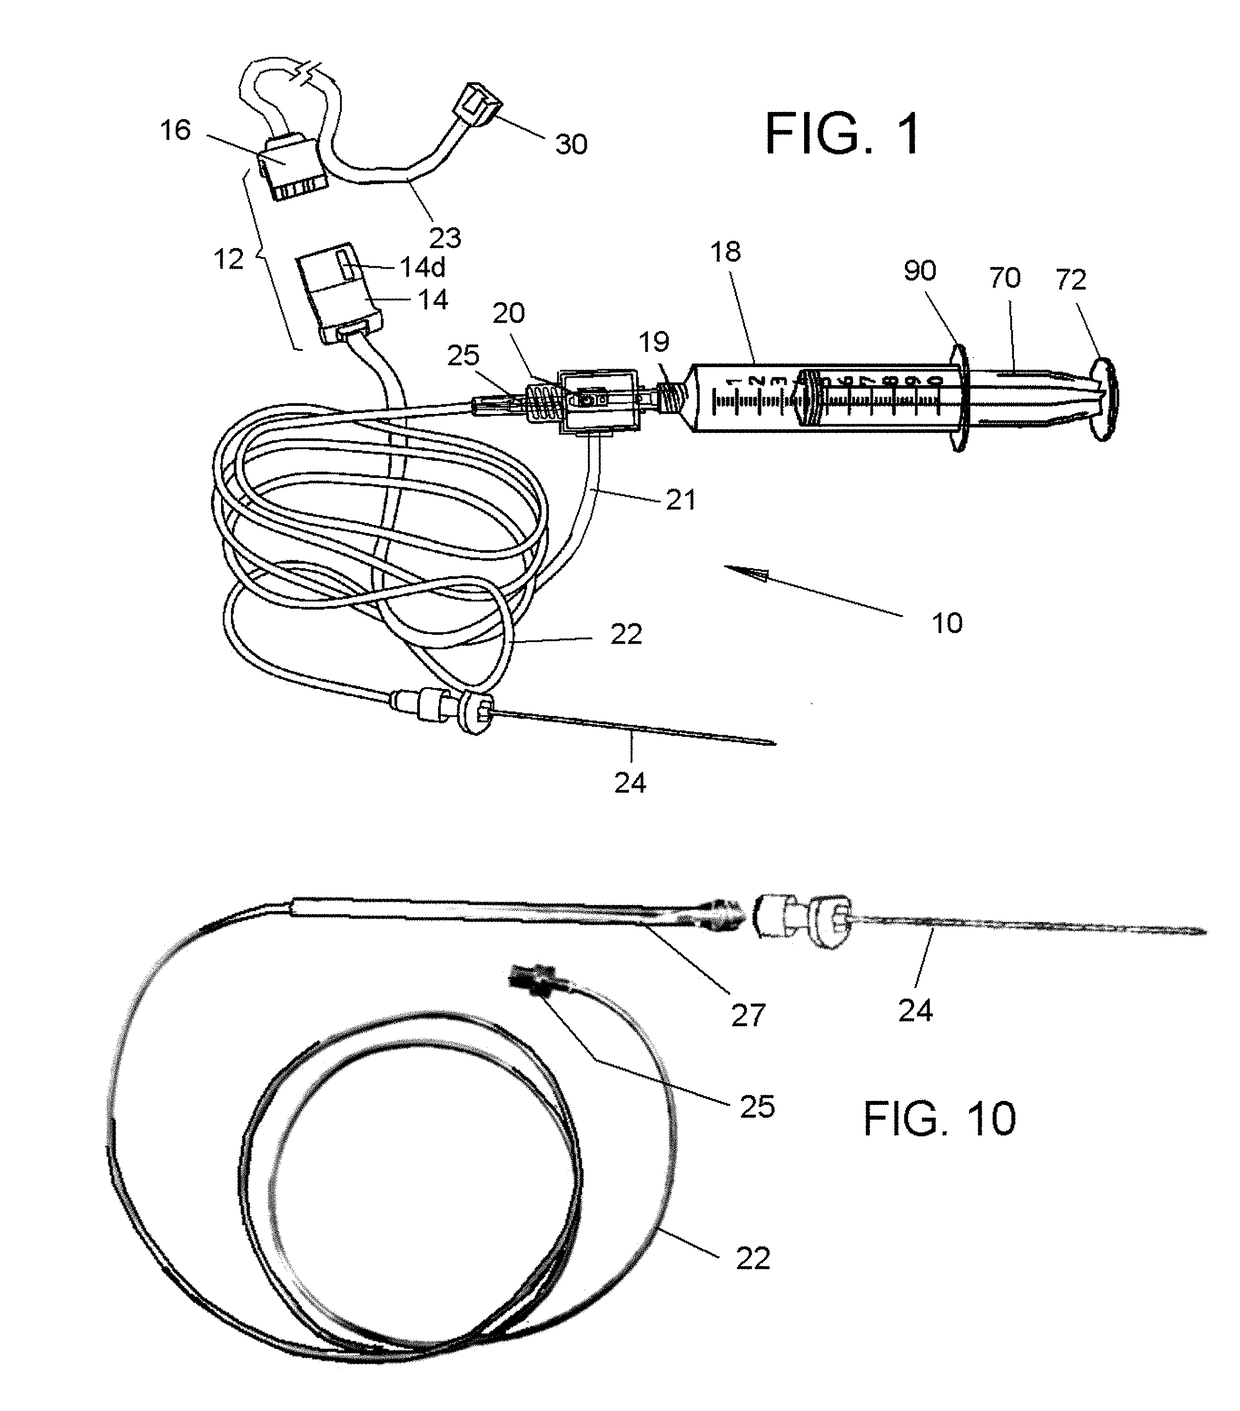 Disposable assembly for drug infusion with pressure sensing for identification of and injection into fluid-filled anatomic spaces